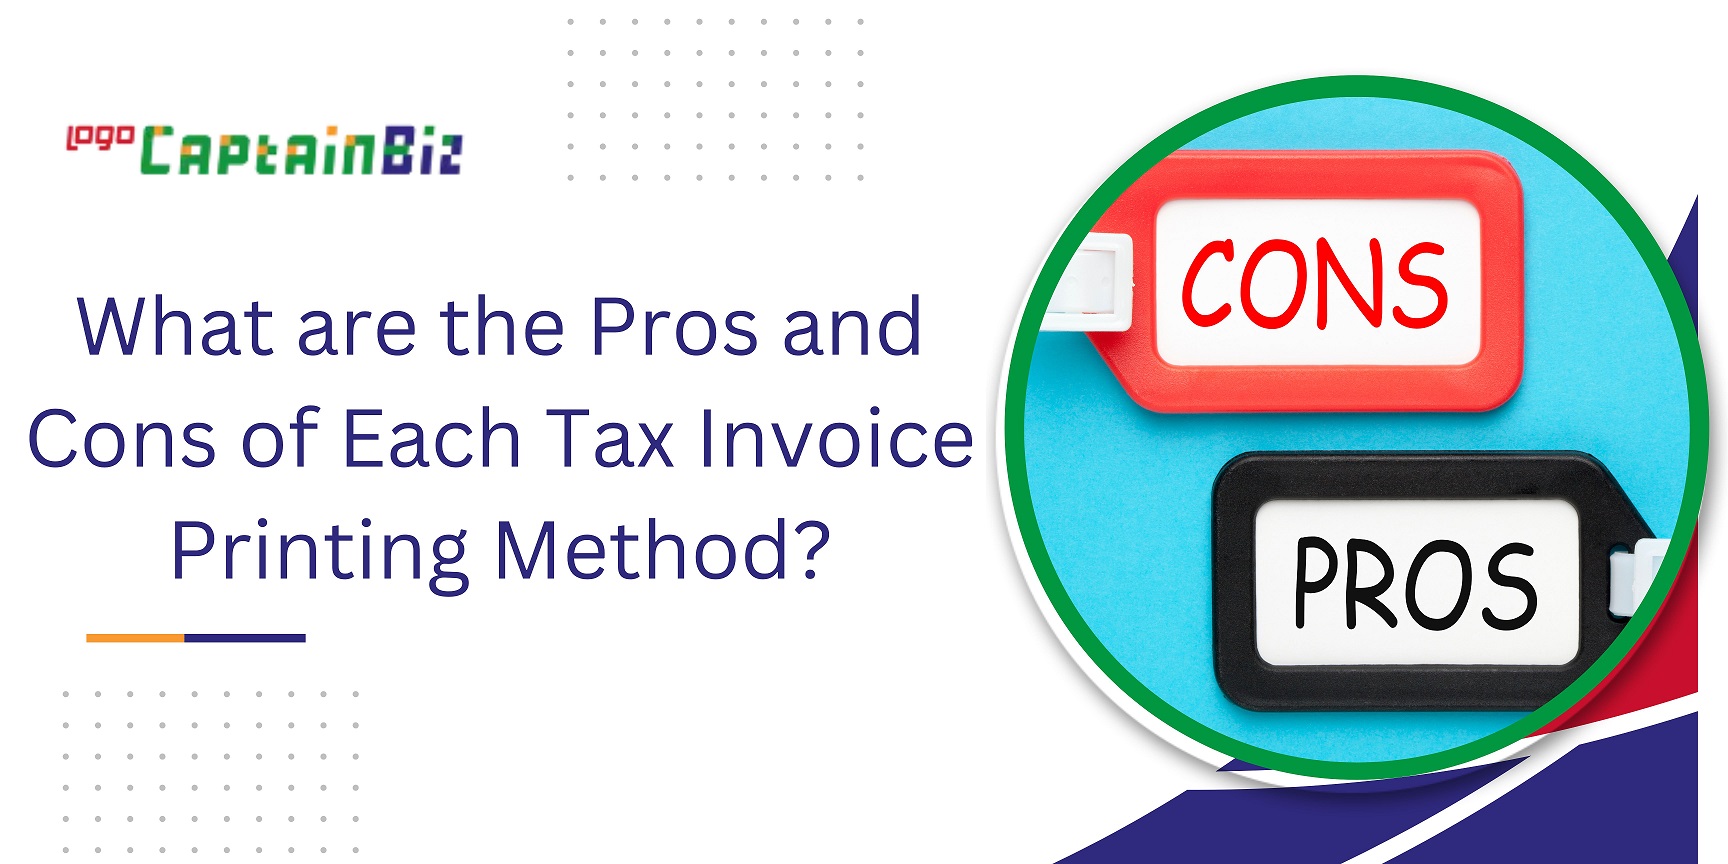 CaptainBiz:What are the Pros and Cons of Each Tax Invoice Printing Method